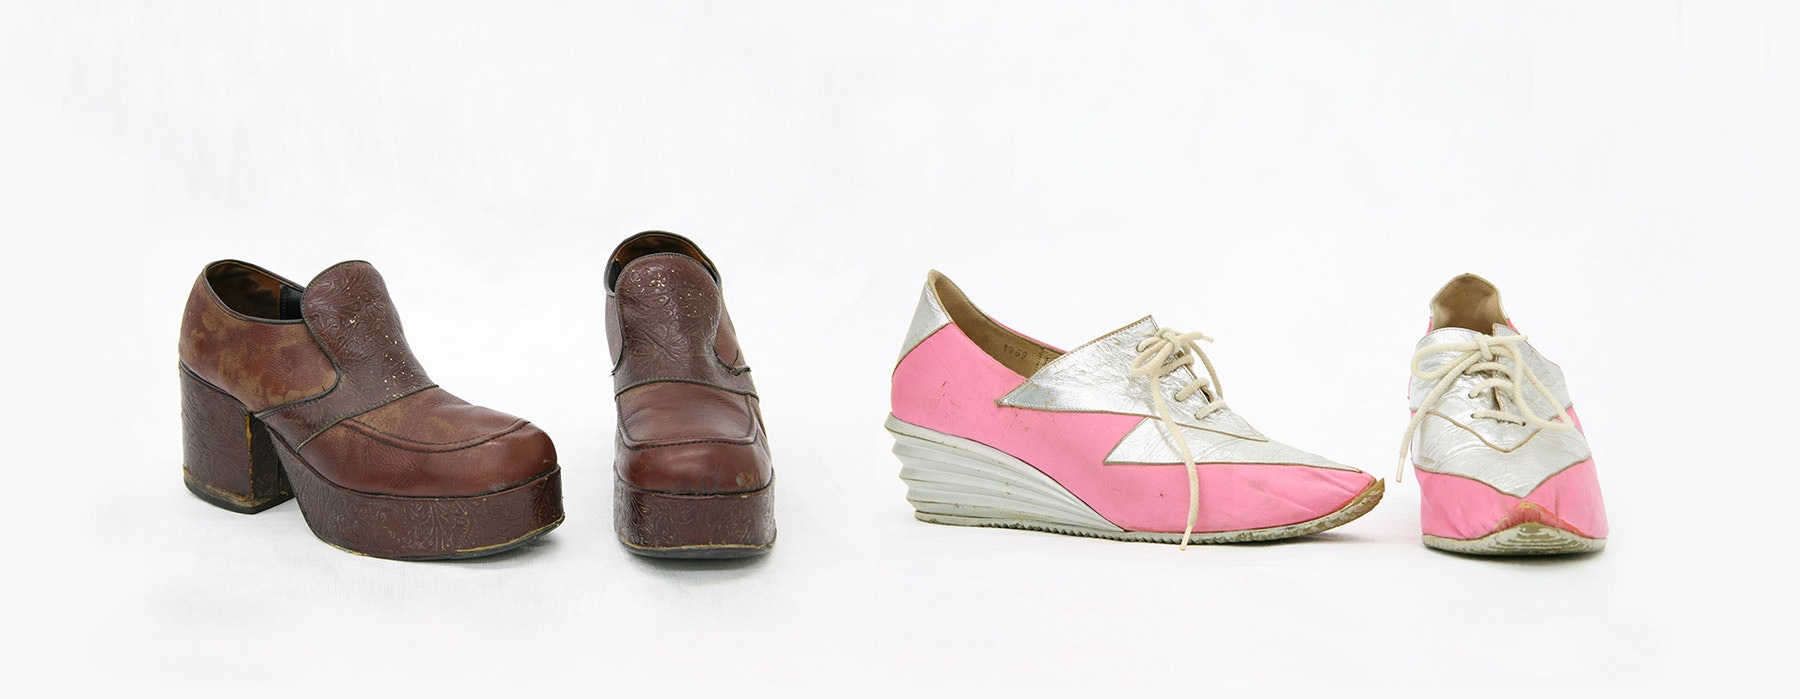 Two pairs of shoes from the 1970s, one brown pair and one pink and white pair